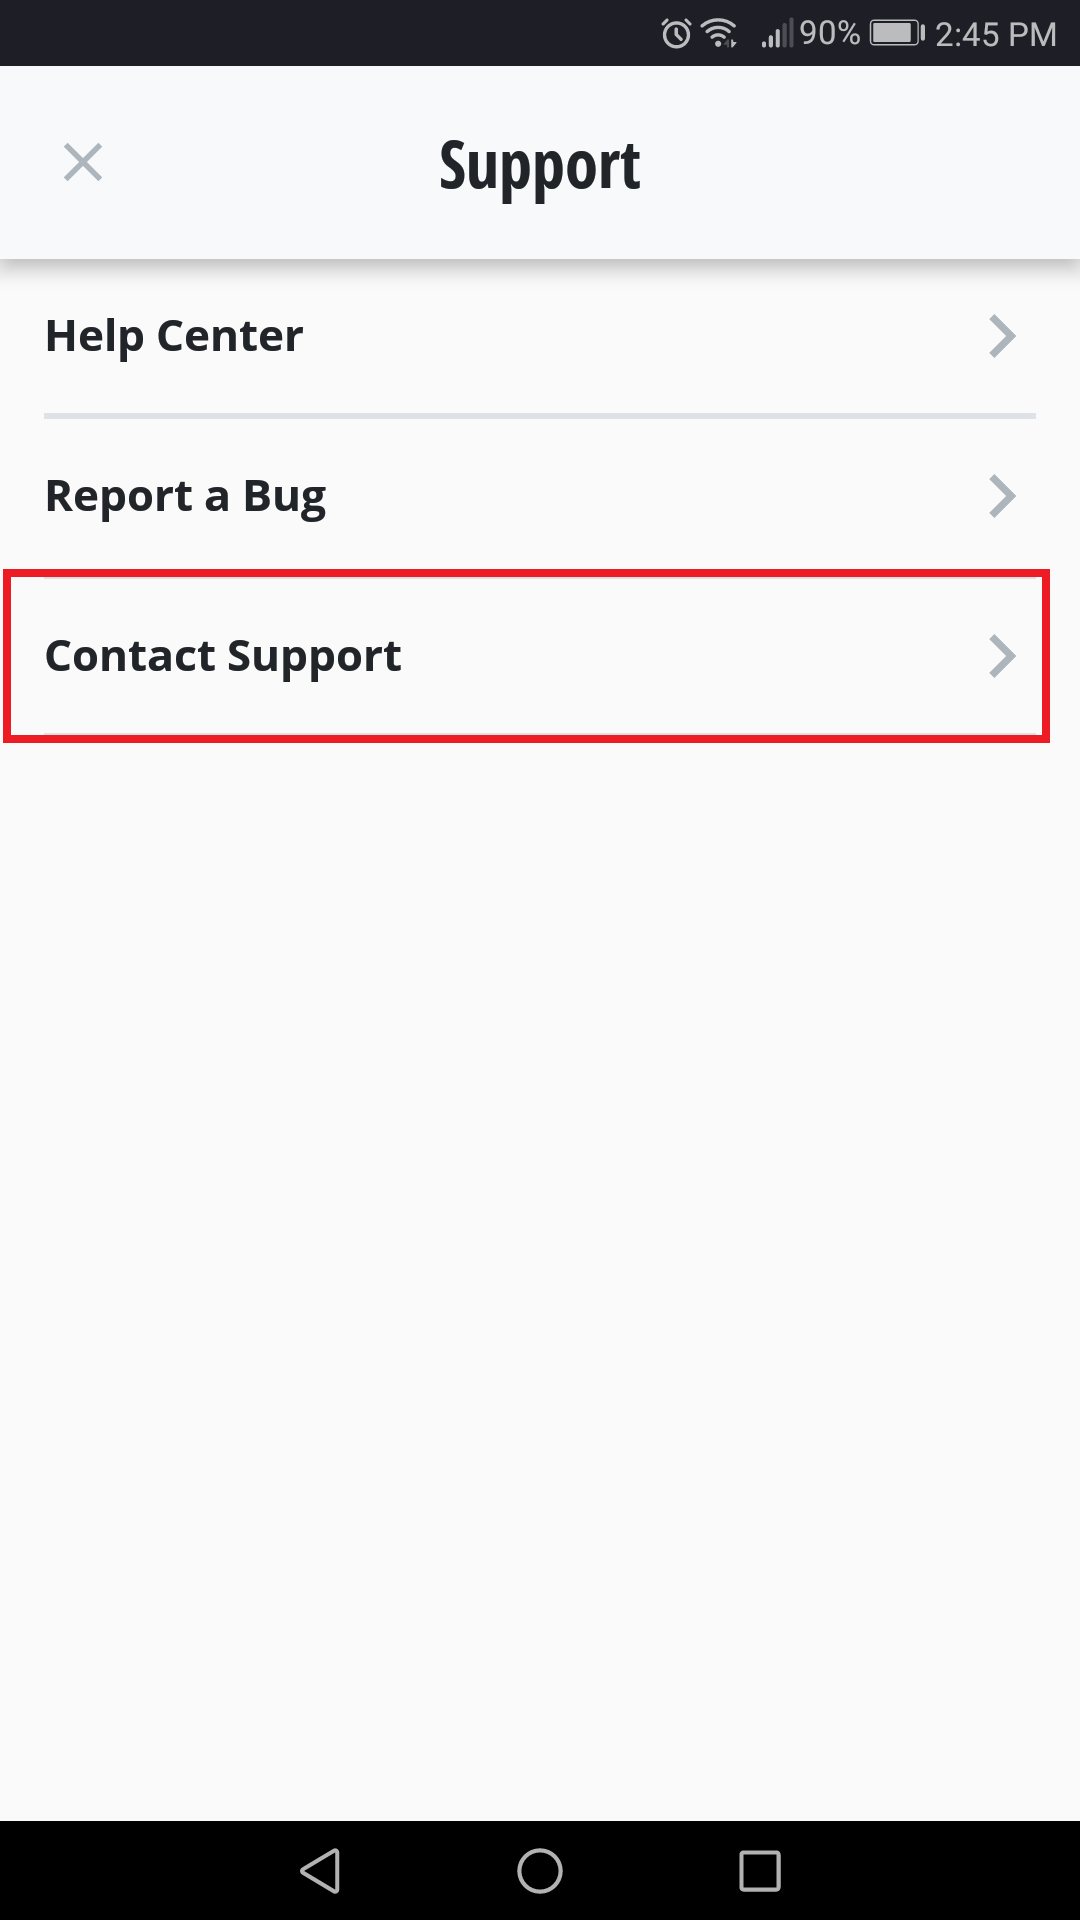 Vypr_App_-_Support_Menu_-_Contact_Support_Selected.png